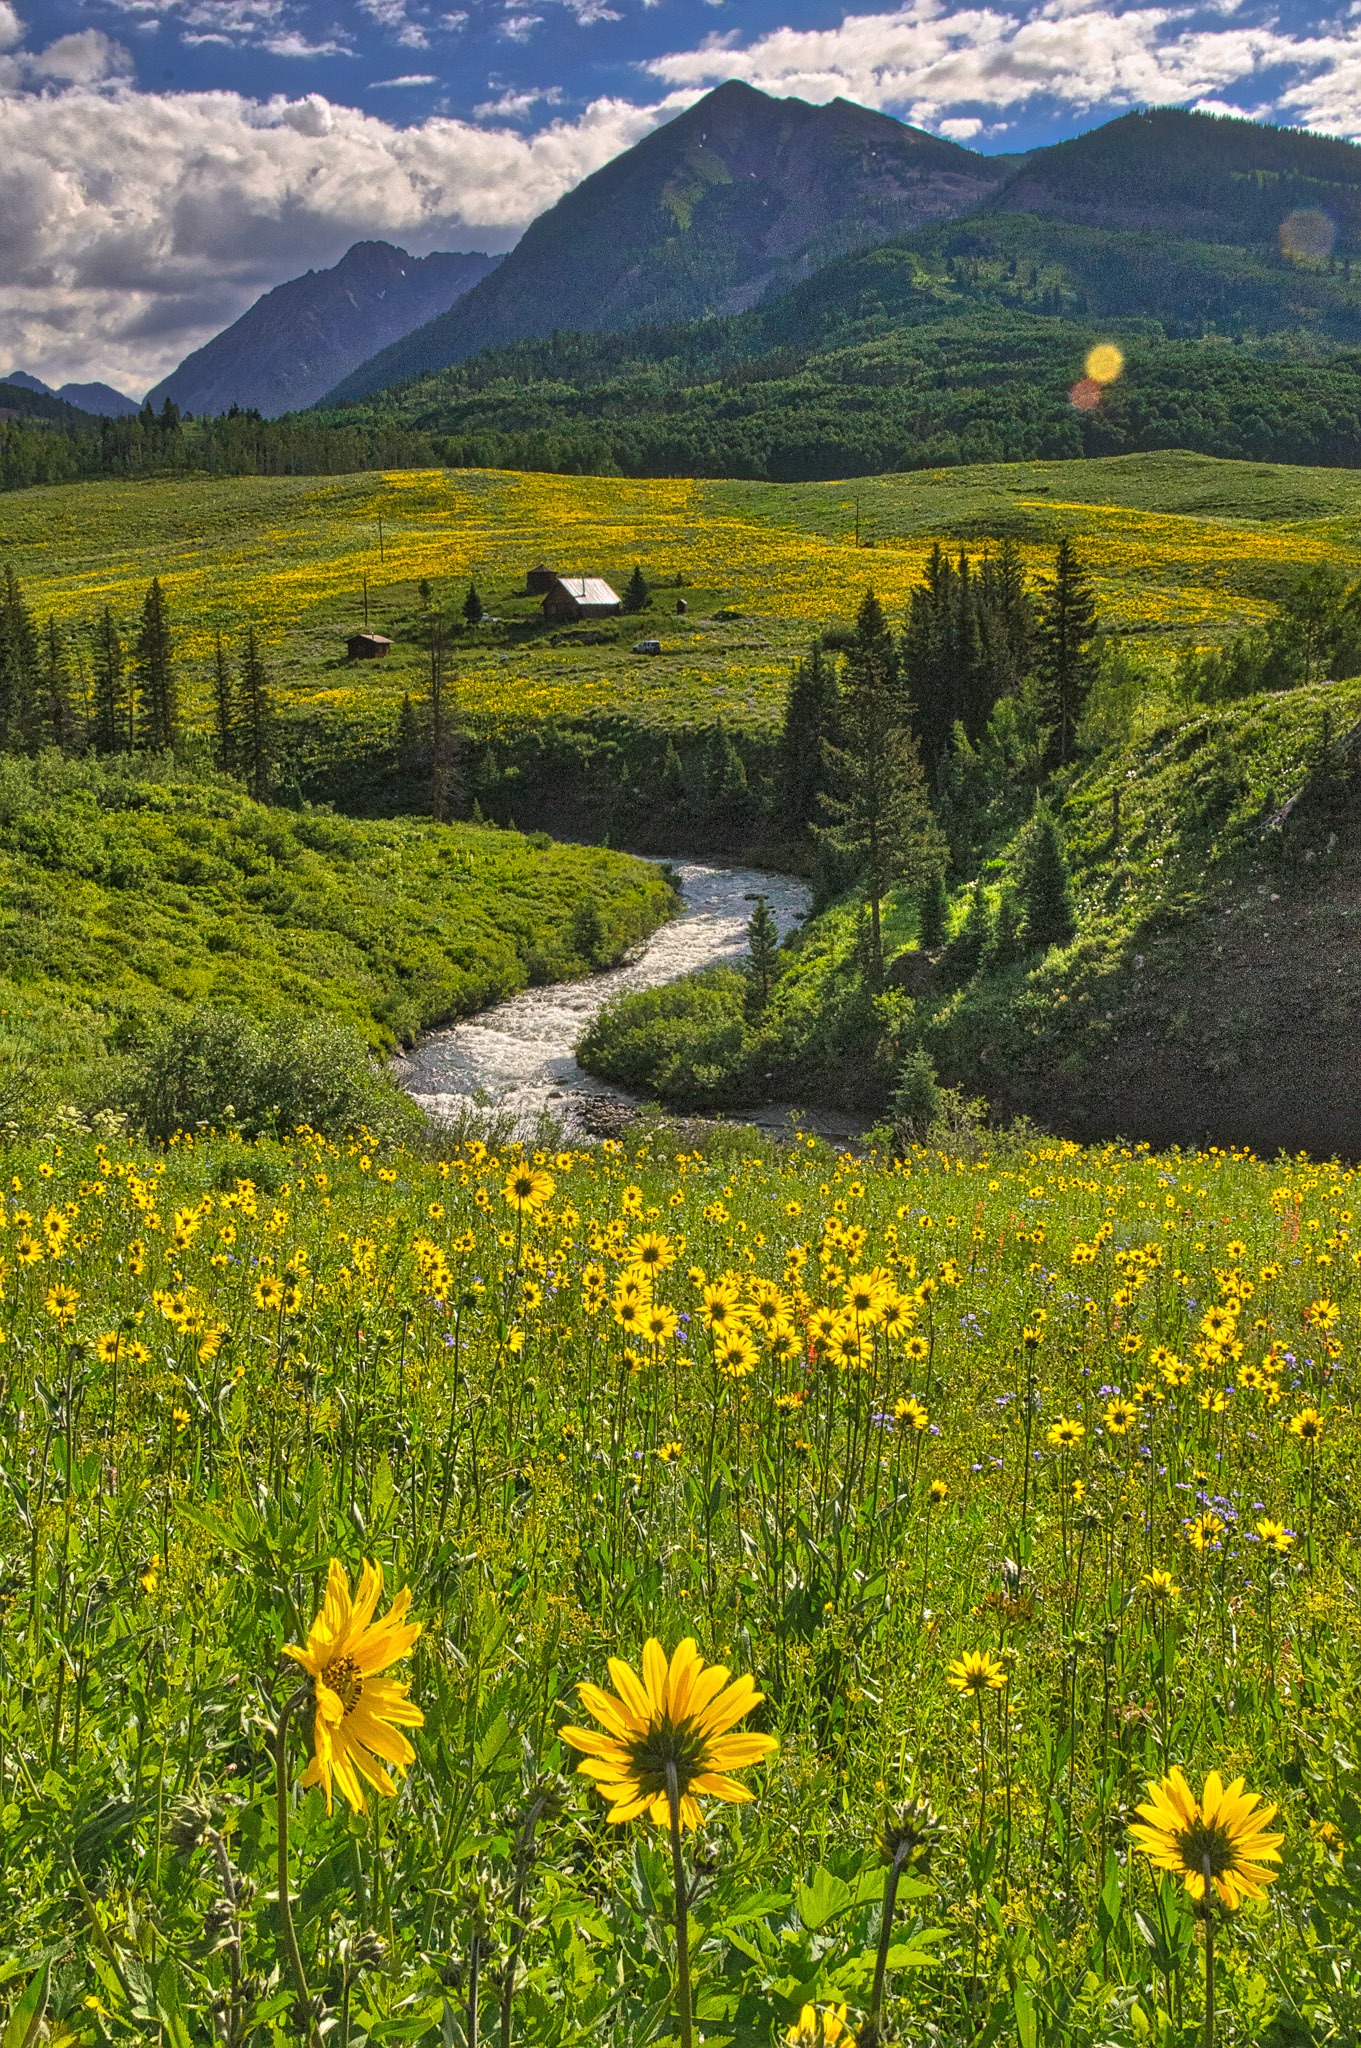 Aspen Sunflowers, Helianthella quinquenervis, grow along Gothic Road, which follows the East River, north of Mount Crested Butte, Colorado